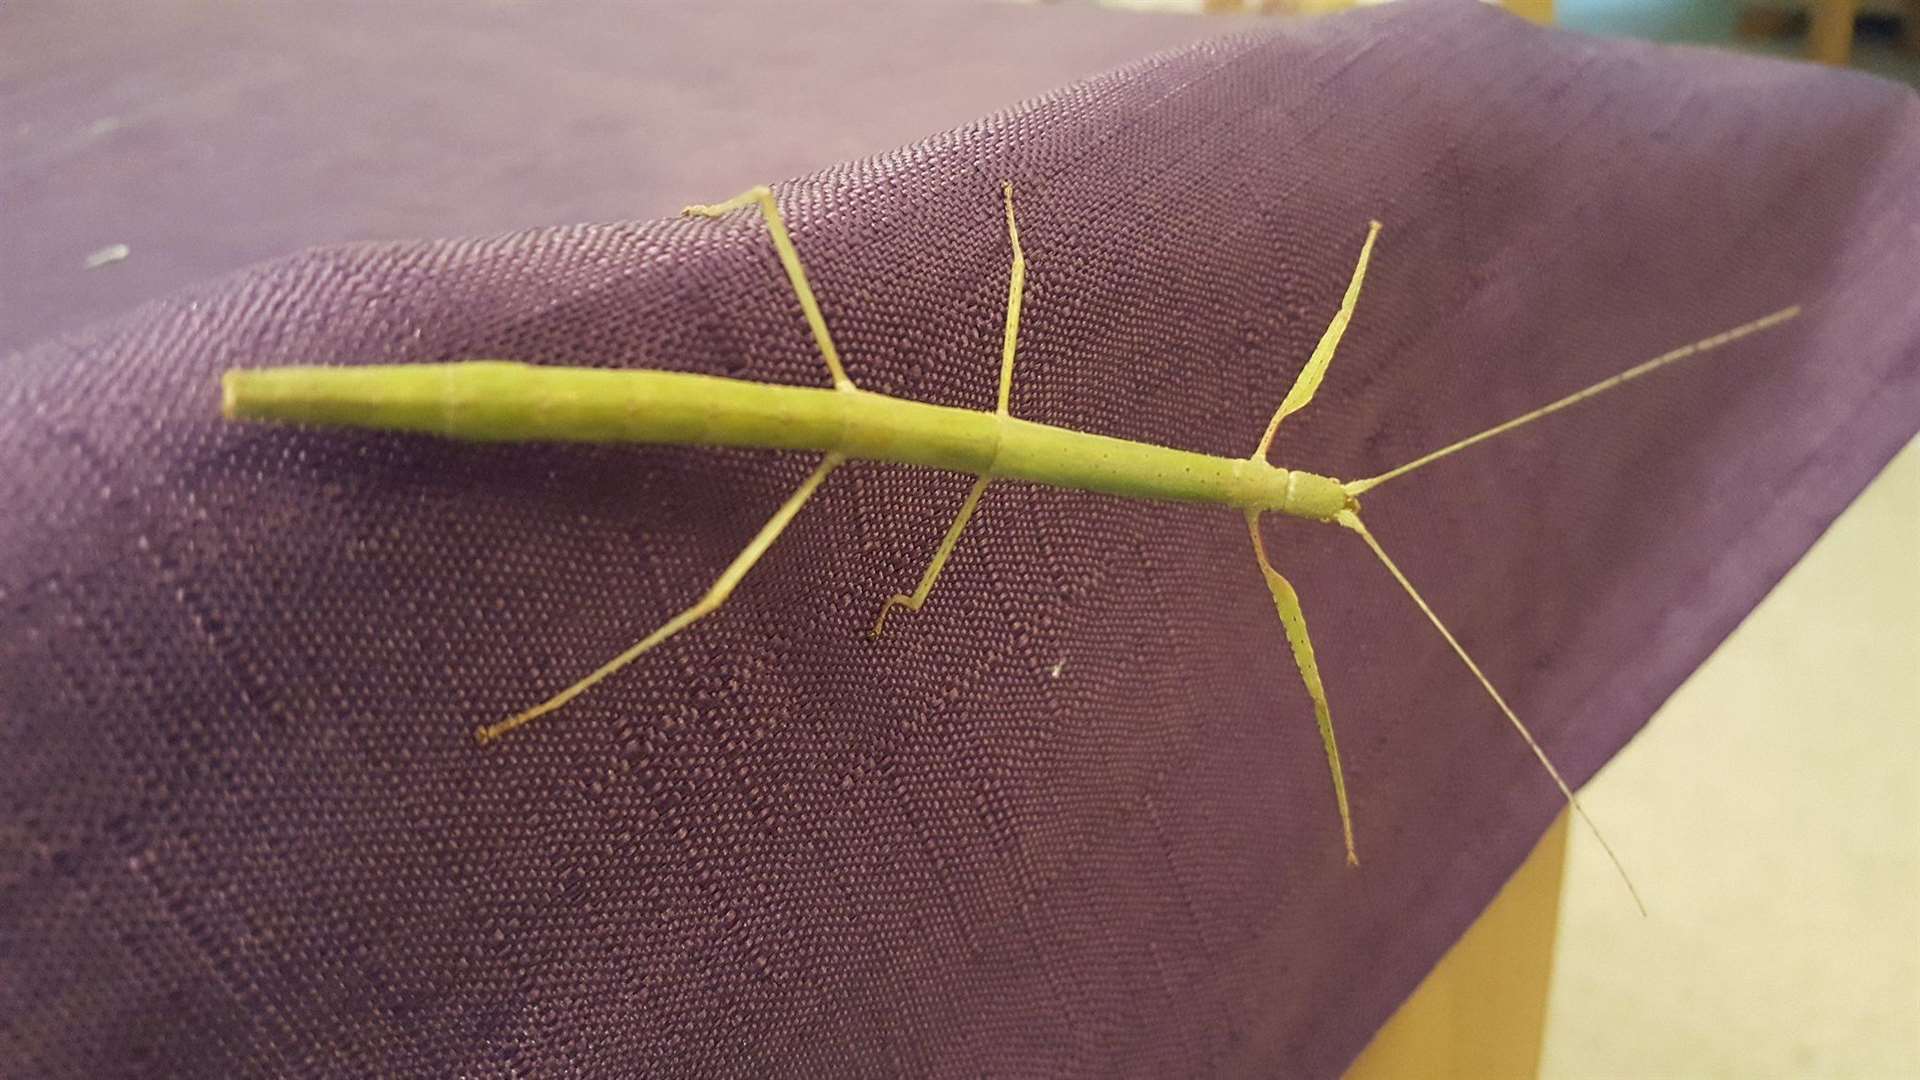 Rosie the Indian stick insect